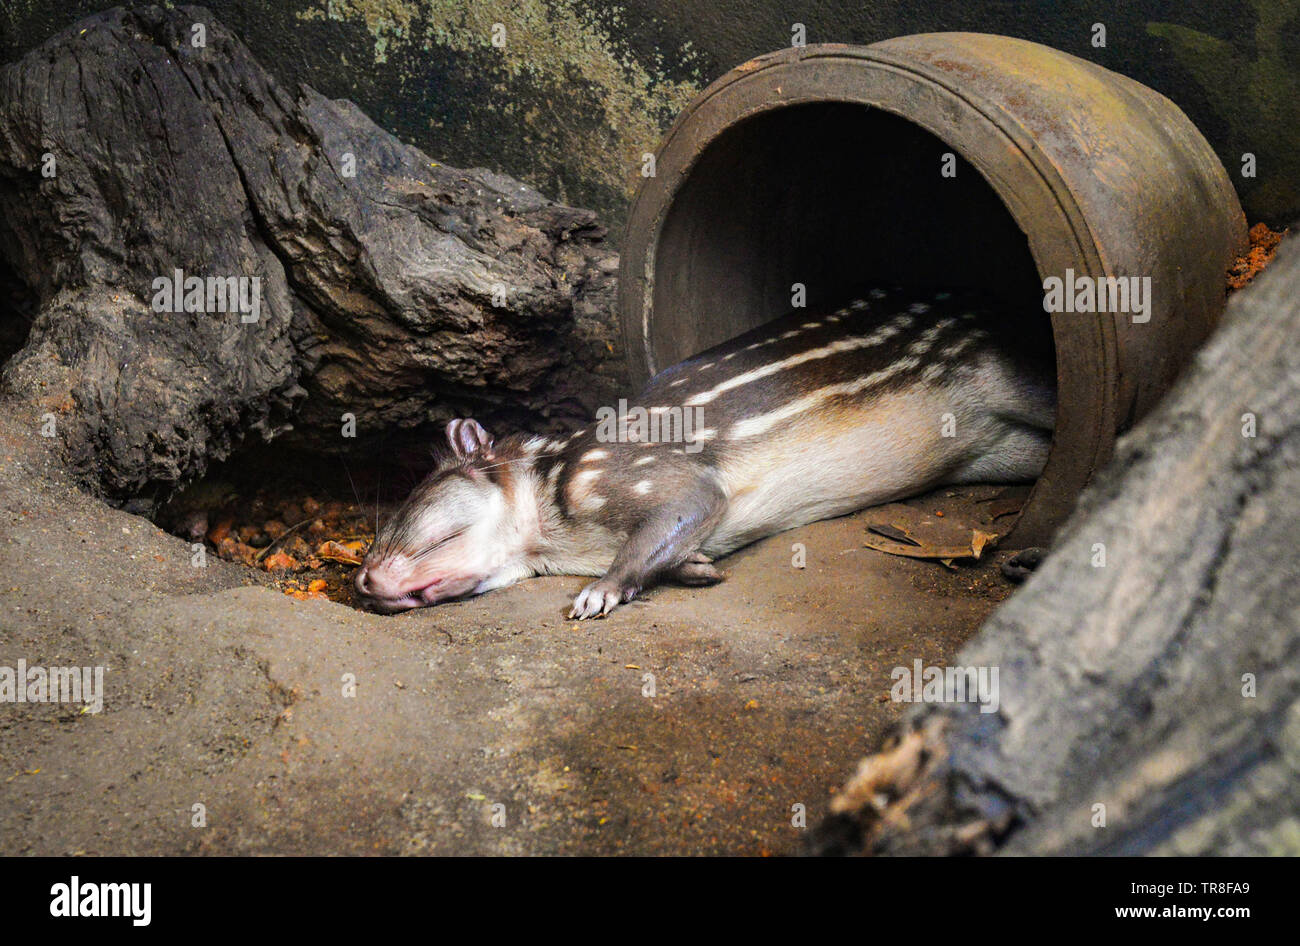 Cuniculus spotted paca mammals of south america / gibnuts giant rats pacas spotted sleep in the wildlife sanctuary Stock Photo